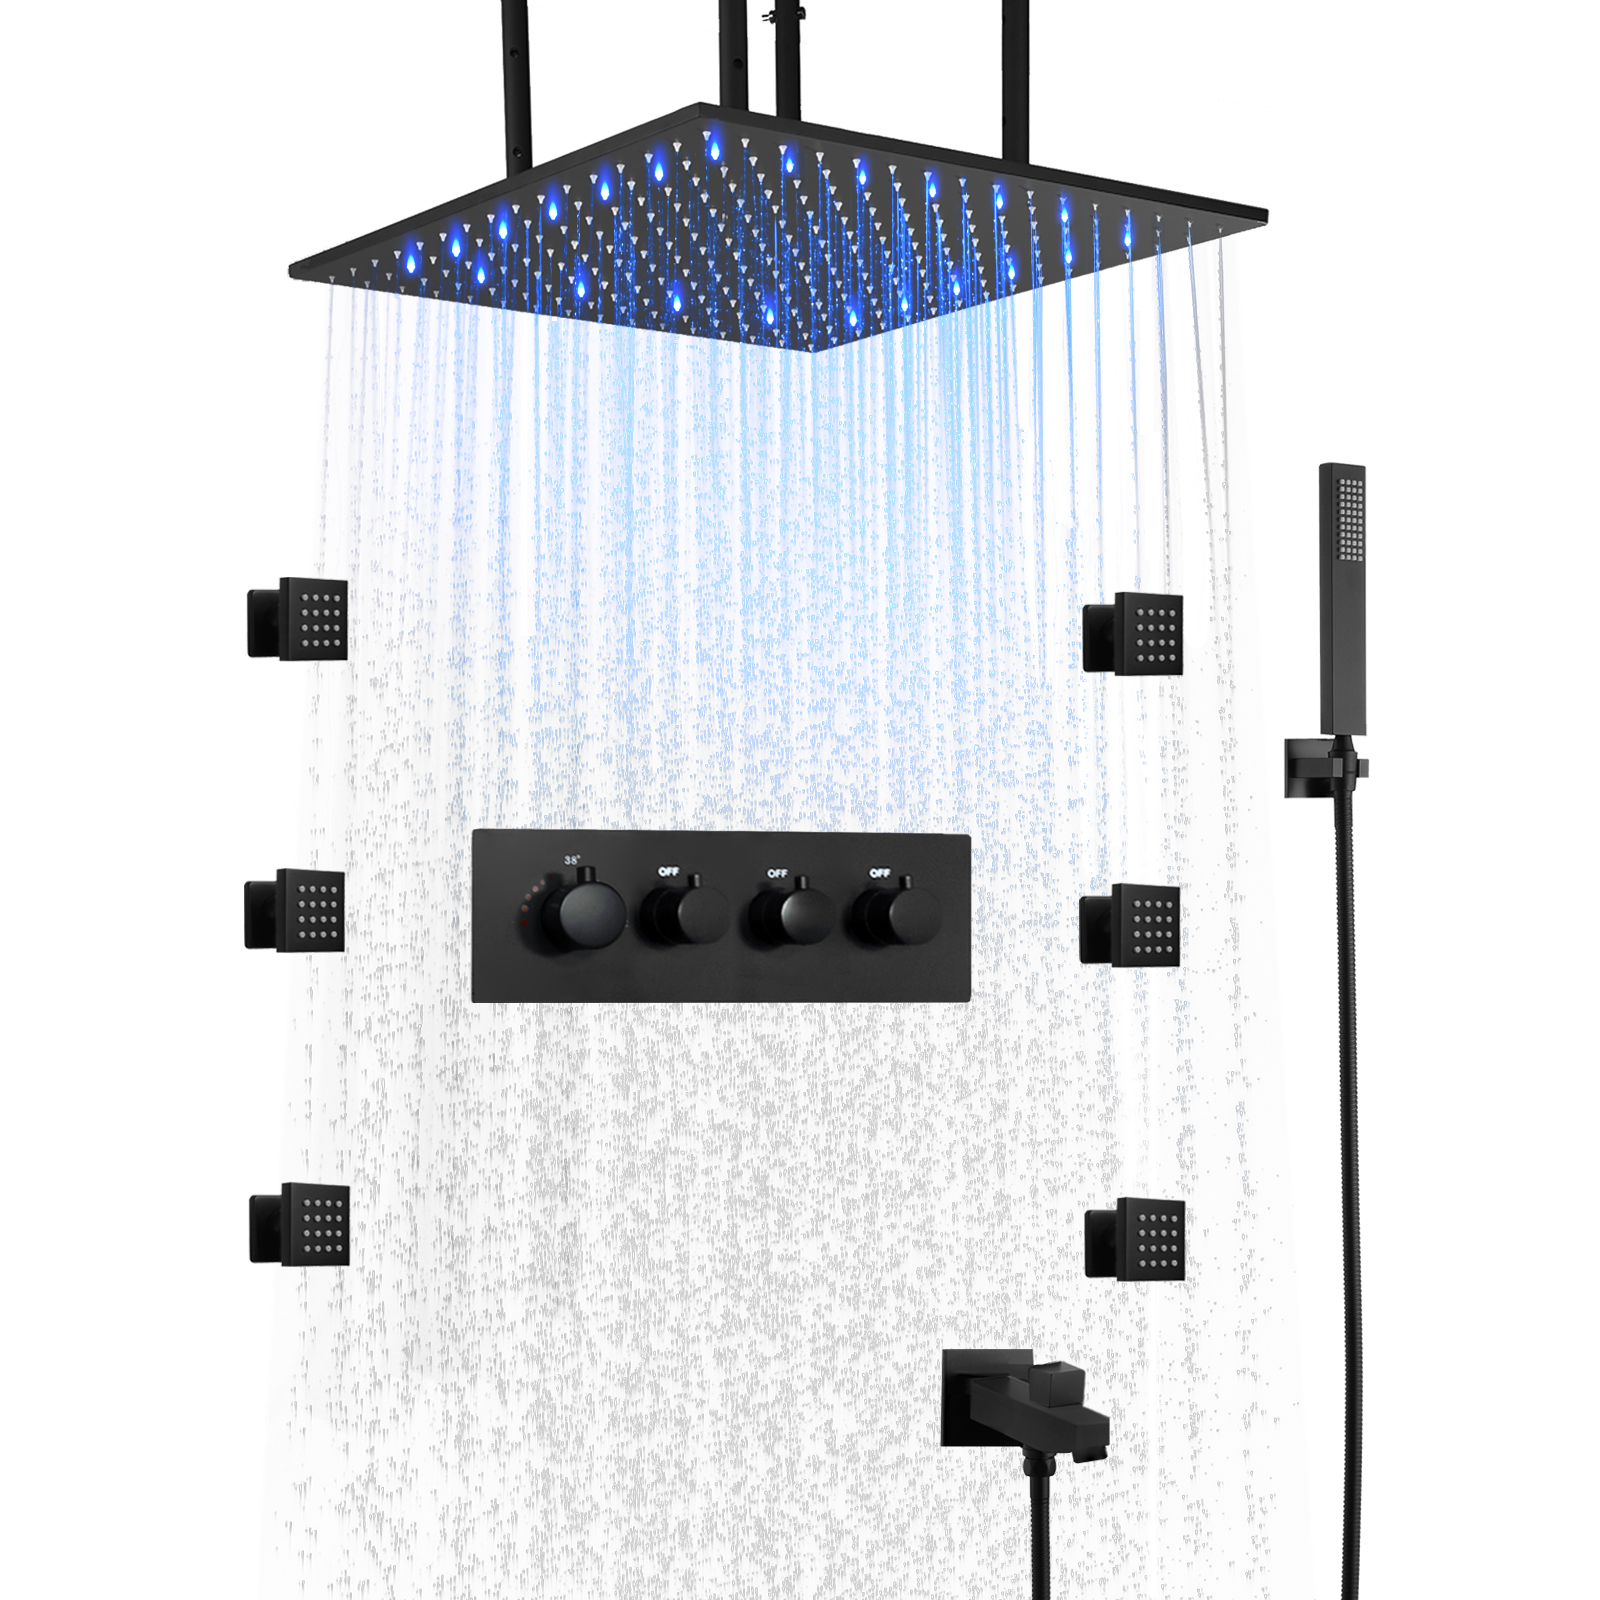 50x50cm Wall -mounted Rain Shower System with Body Spray LED Shower Fixed Device Flushing Set Shower Water Faucet